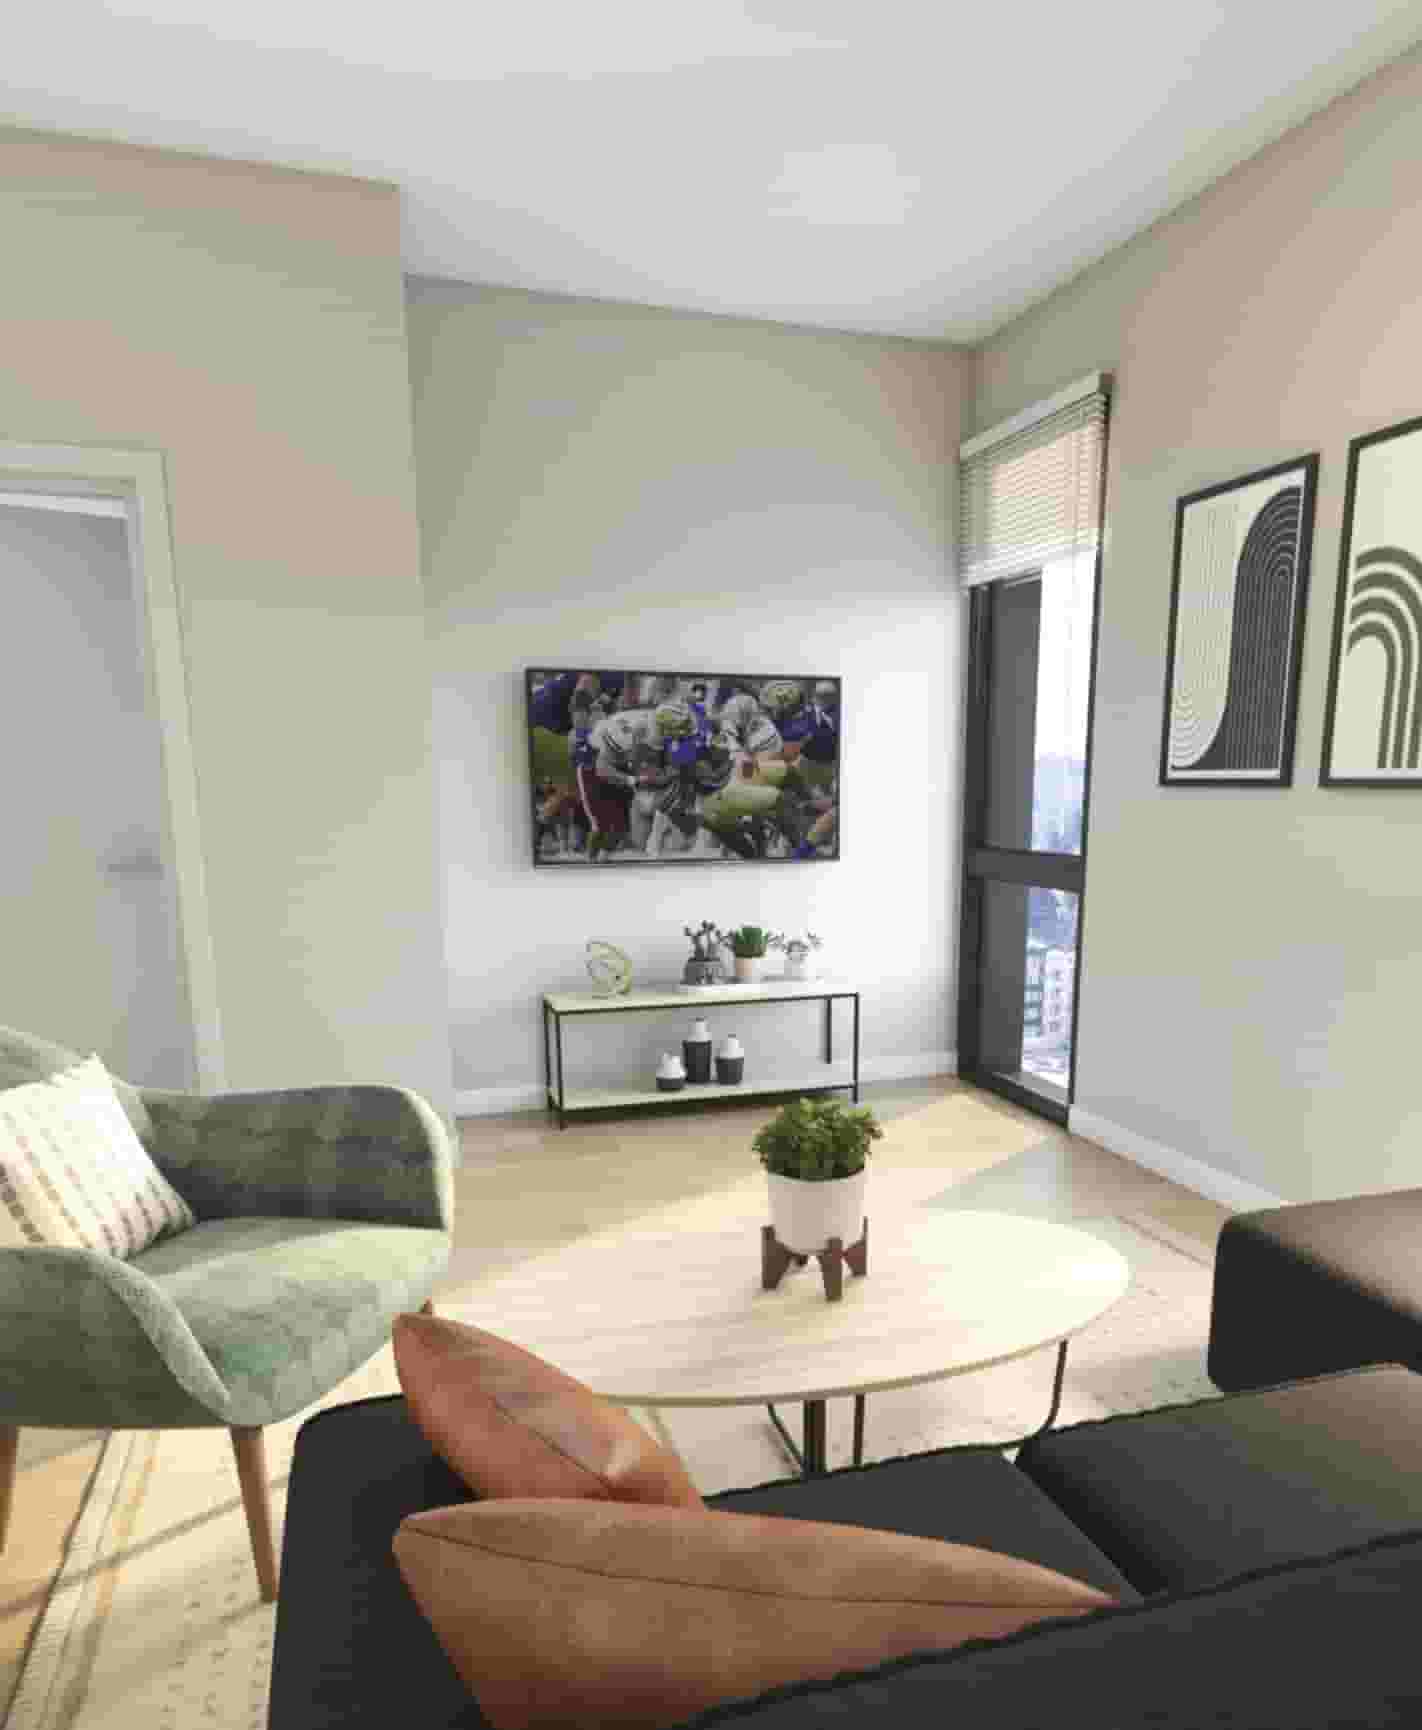 For game days and movie nights, TVs included in all apartments